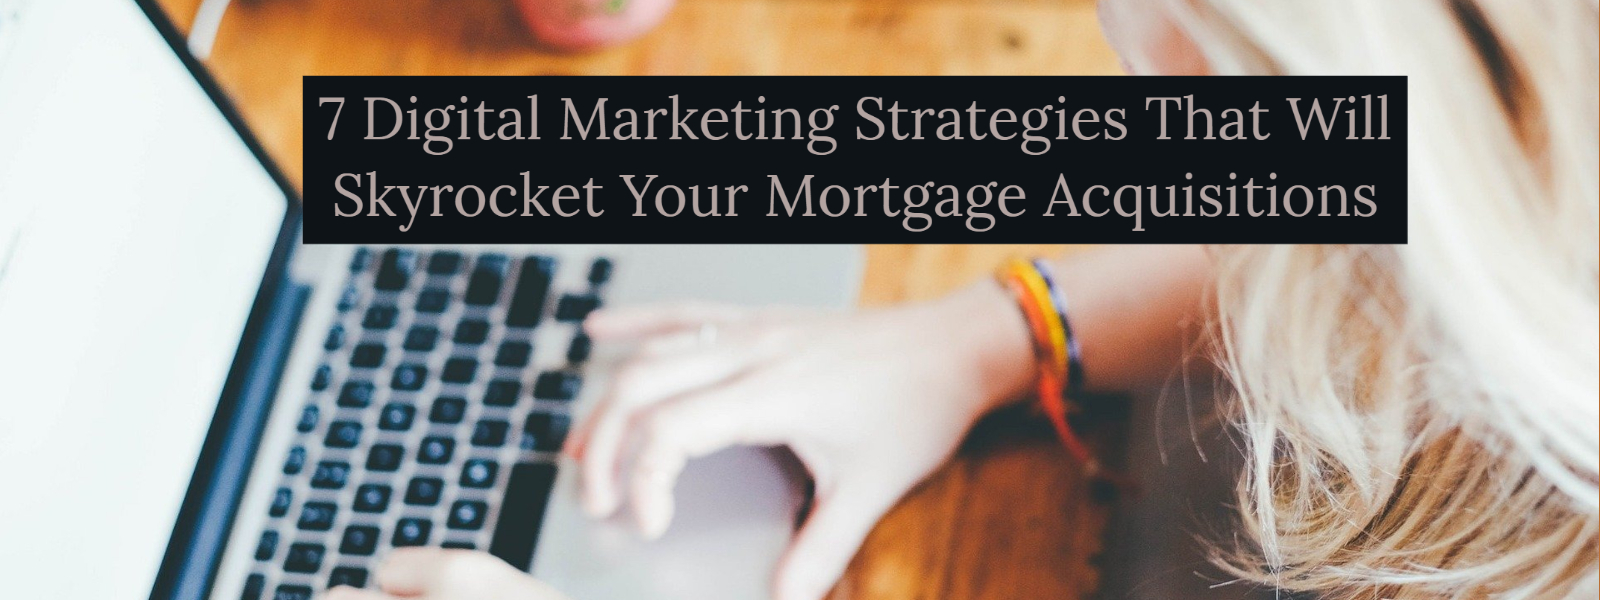 7 Digital Marketing Strategies That Will Skyrocket Your Mortgage Acquisitions